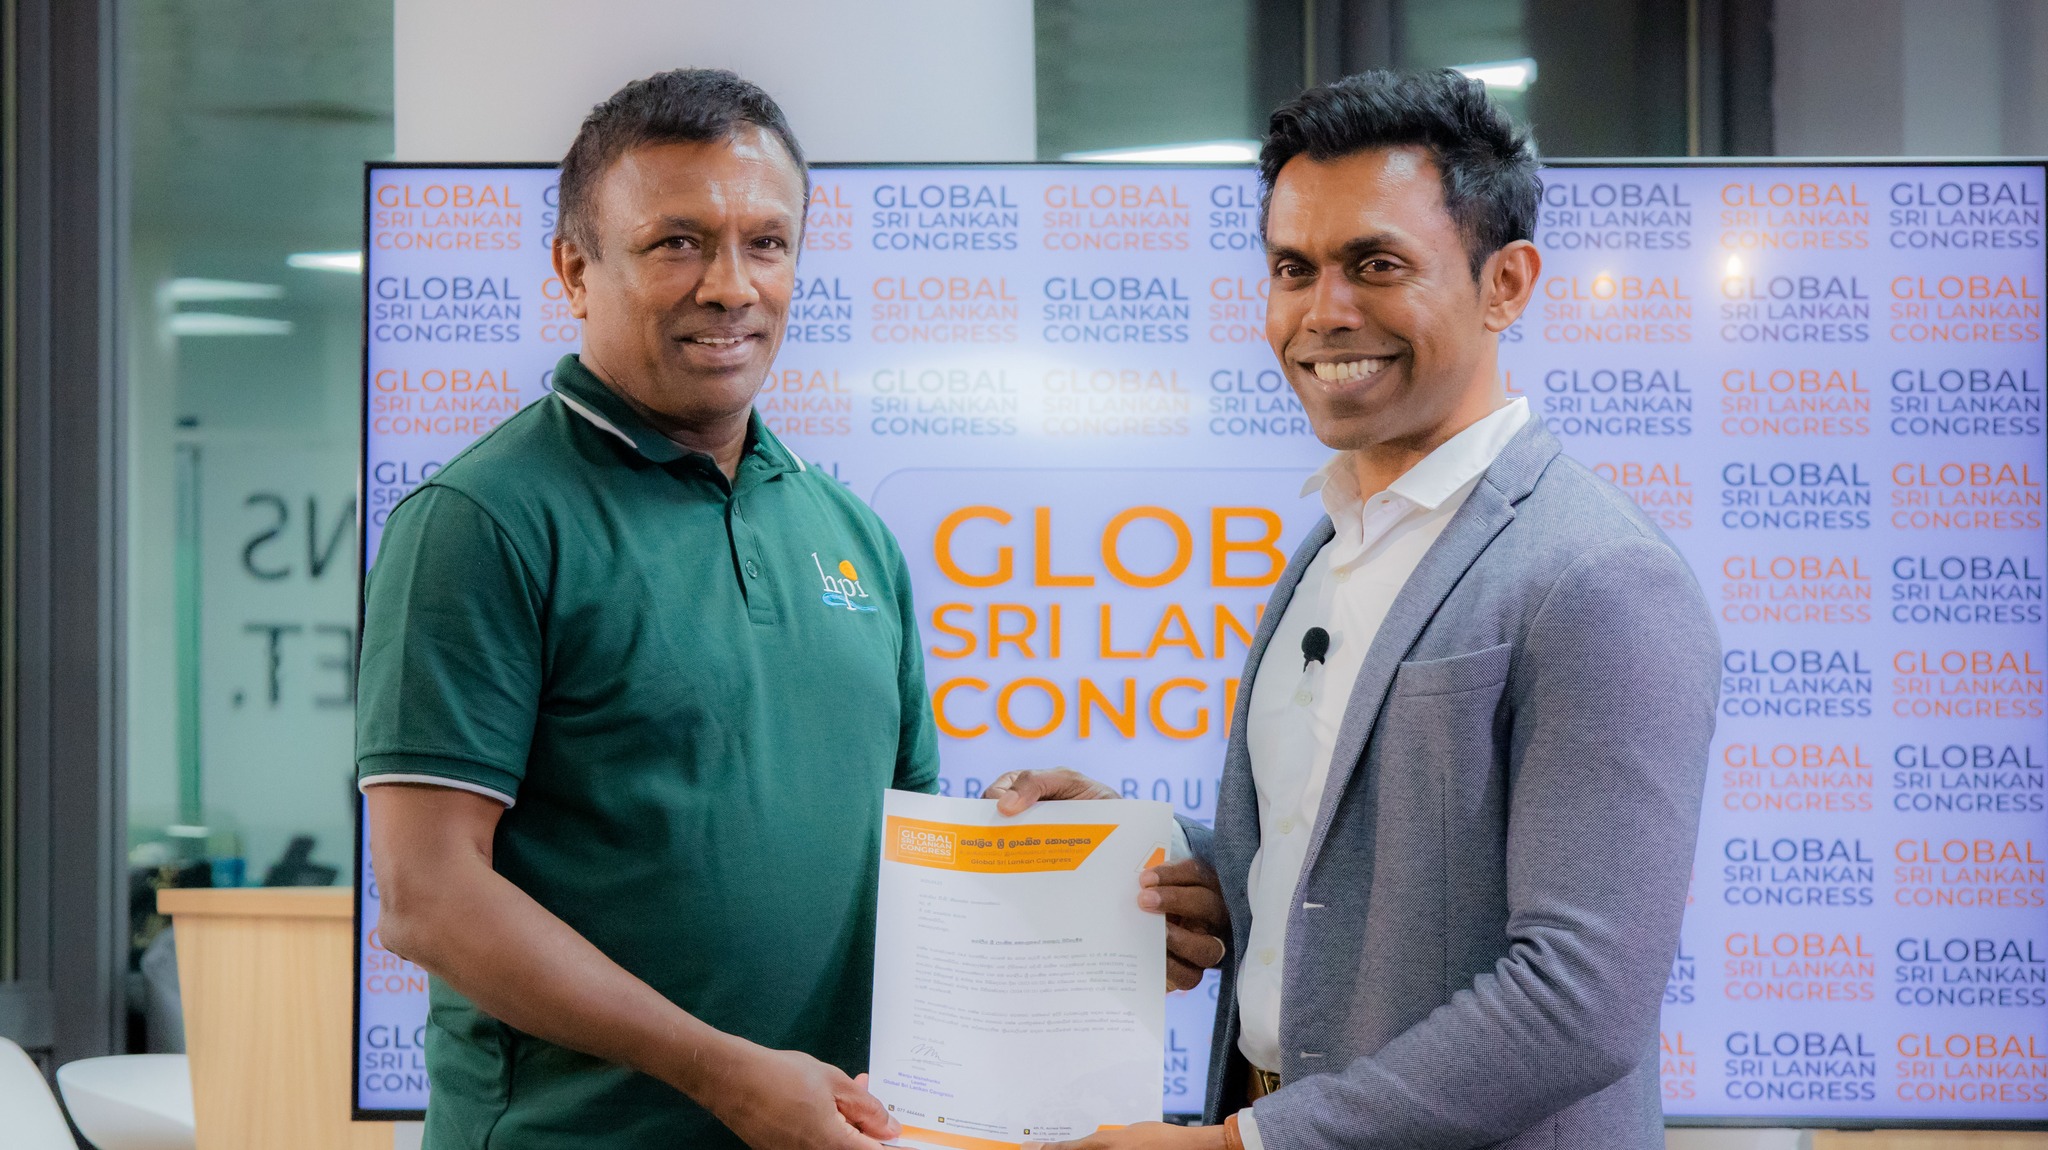 Global Sri Lankan Congress officially appointed General Secretary, Vice President and National Organizer